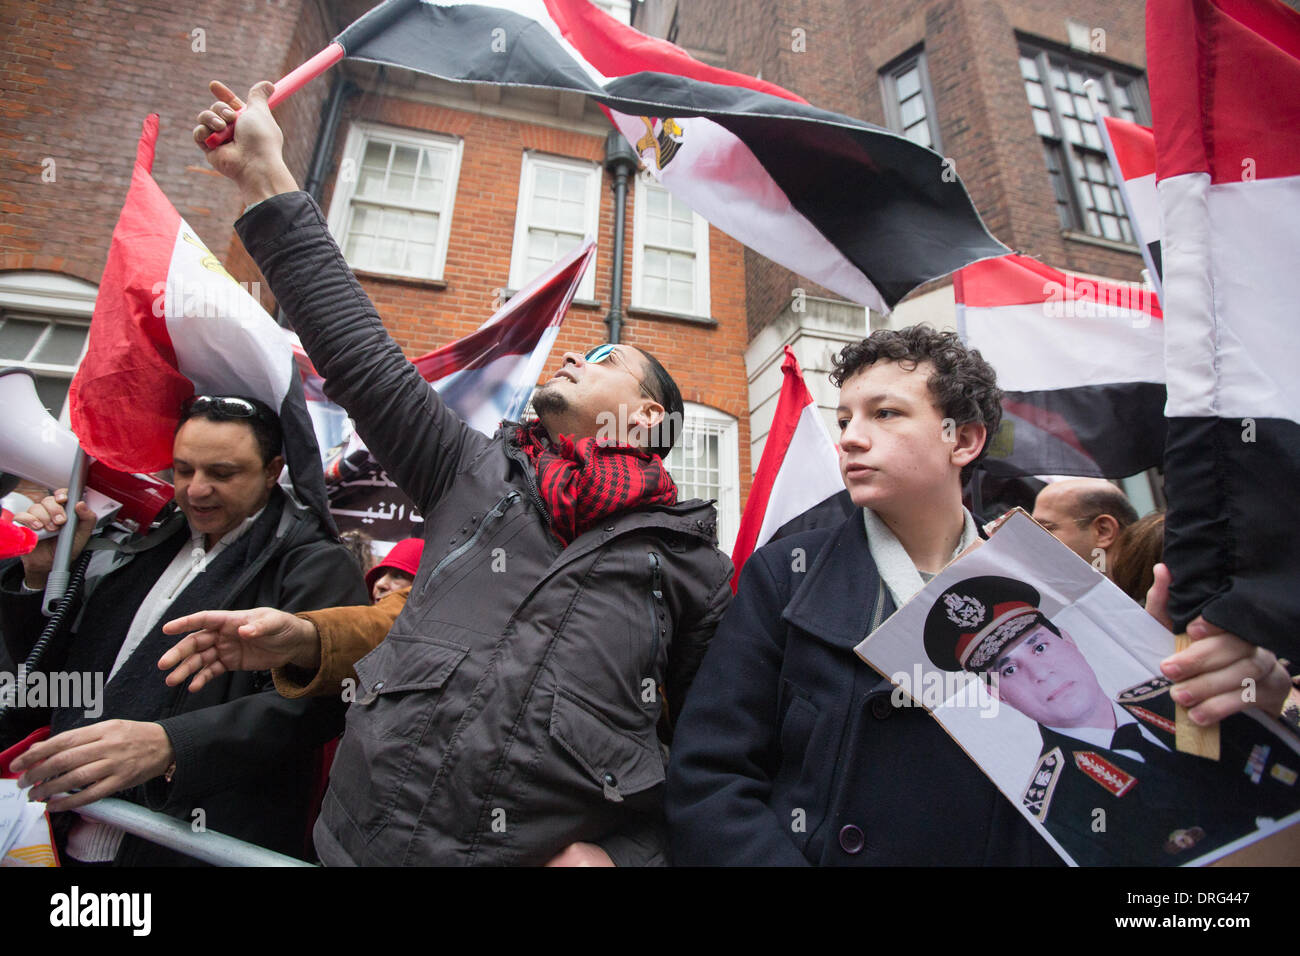 London, UK. 25th January 2014.  Supporters of General Abdel-Fattah al-Sisi gathered outside the Egyptian embassy in London as an opposition to the Pro Morsi demonstration. Credit:  Lydia Pagoni/Alamy Live News Stock Photo